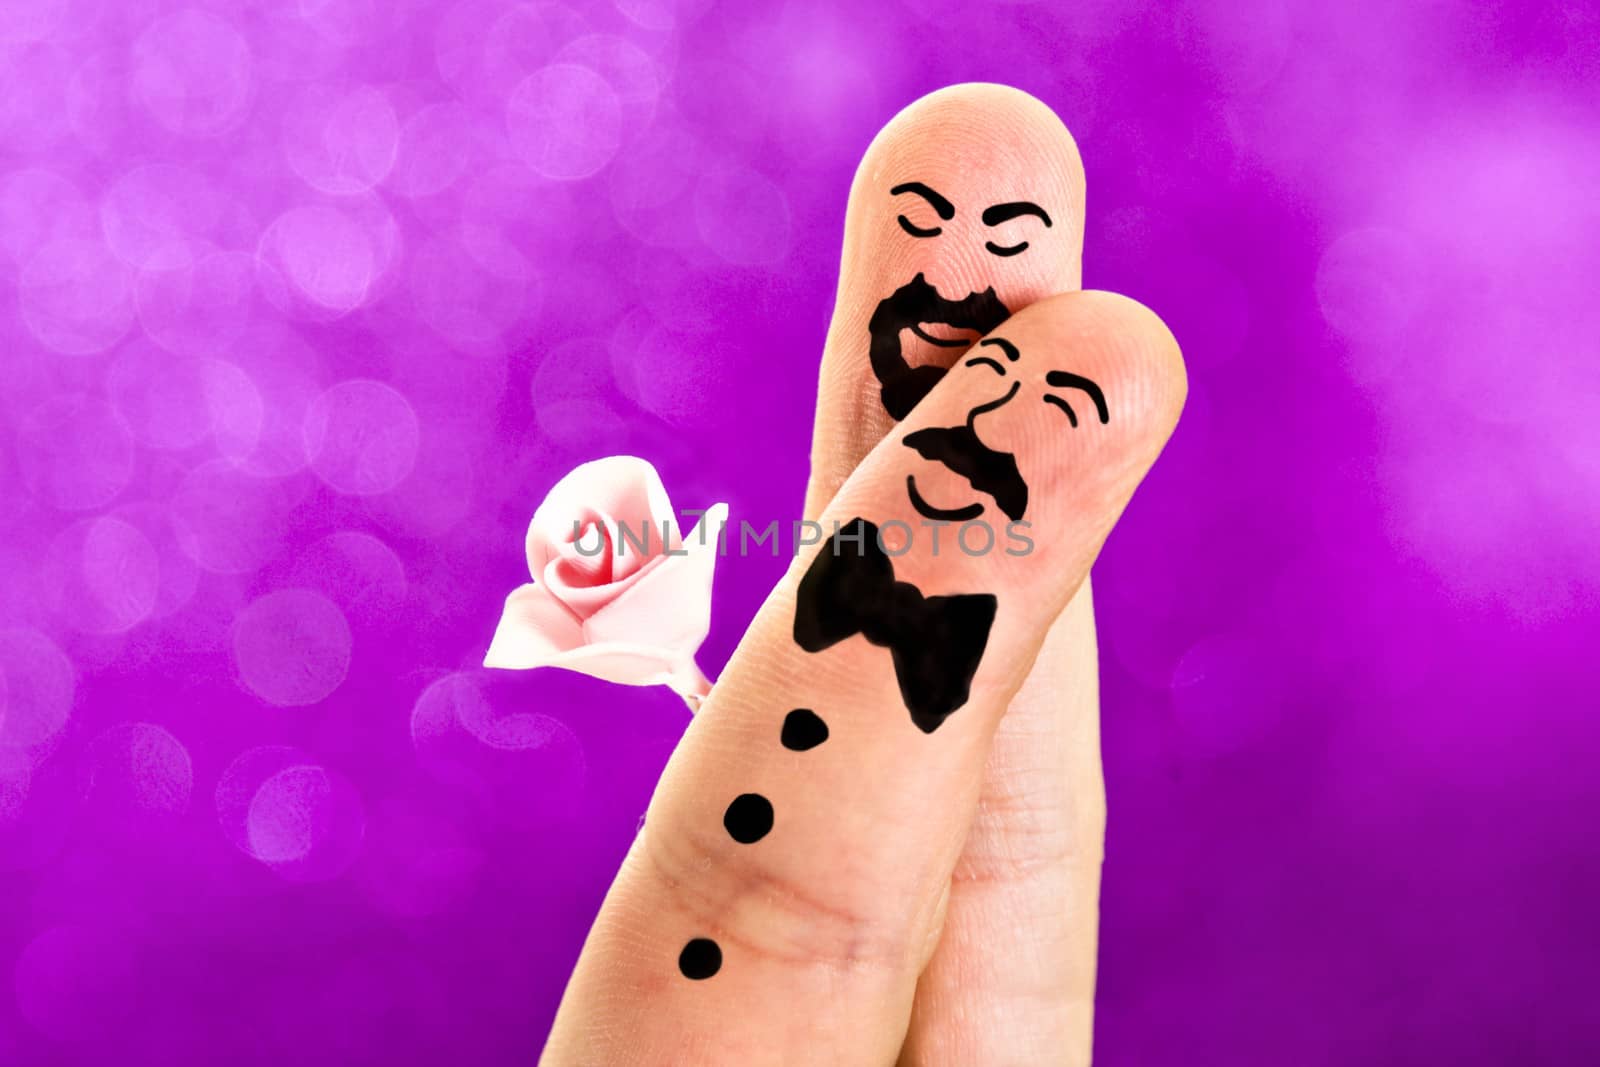 Fingers with sweet faces painted featuring a gay wedding between a man with a moustache and a bowtie and a guy with a beard an a rose